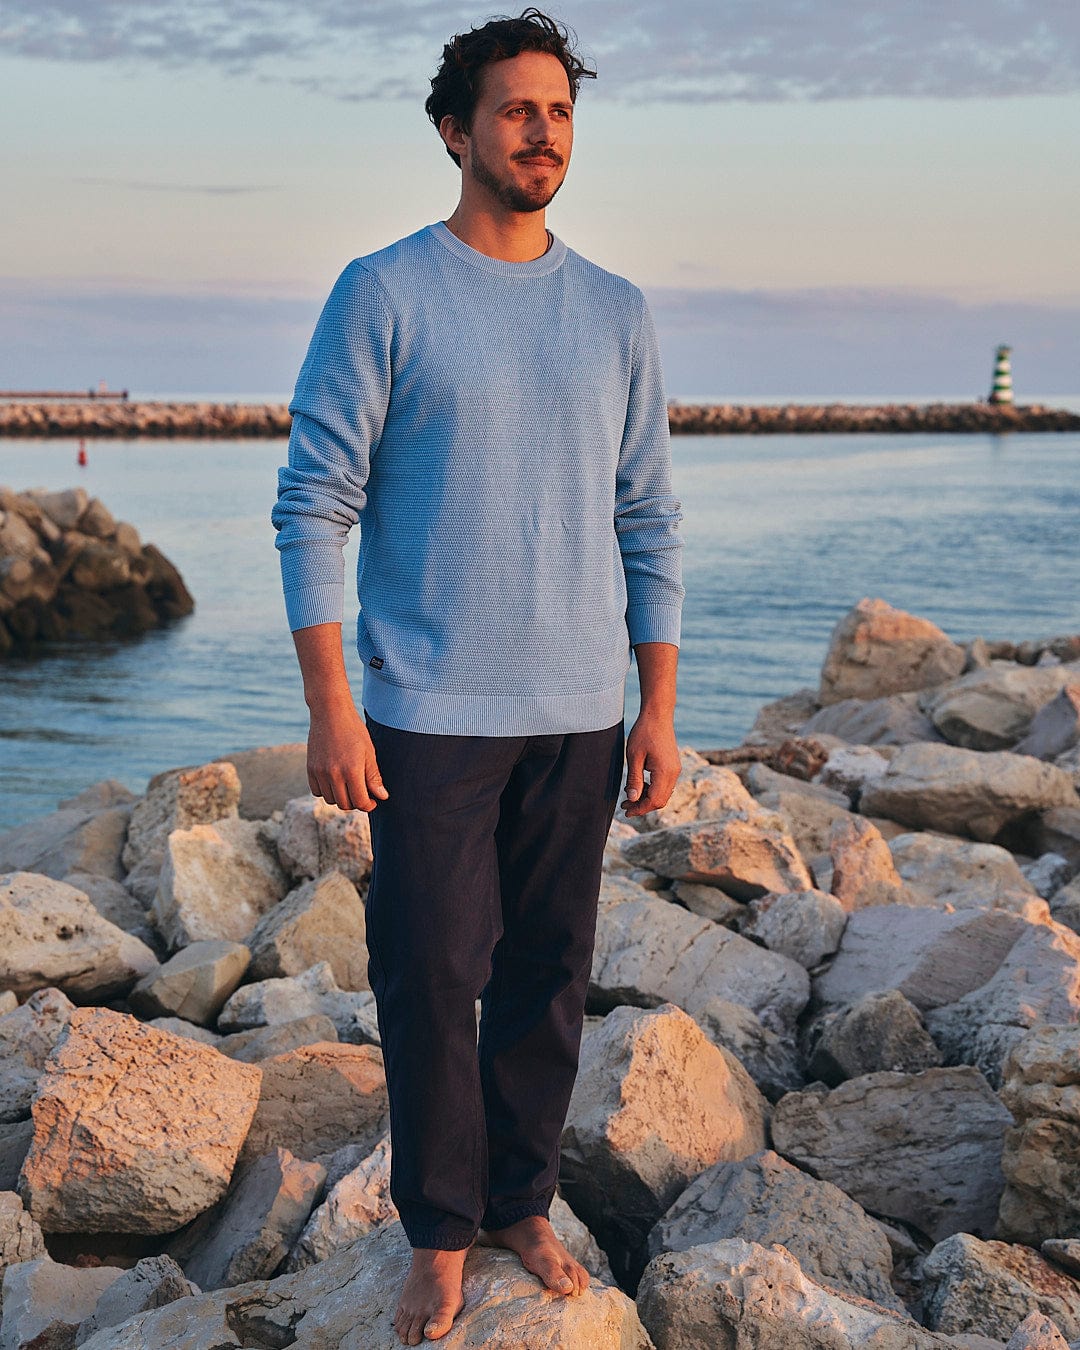 A man standing on rocks next to the ocean wearing a Saltrock - Moss Mens Washed Knitted Crew - Light Blue sweater.